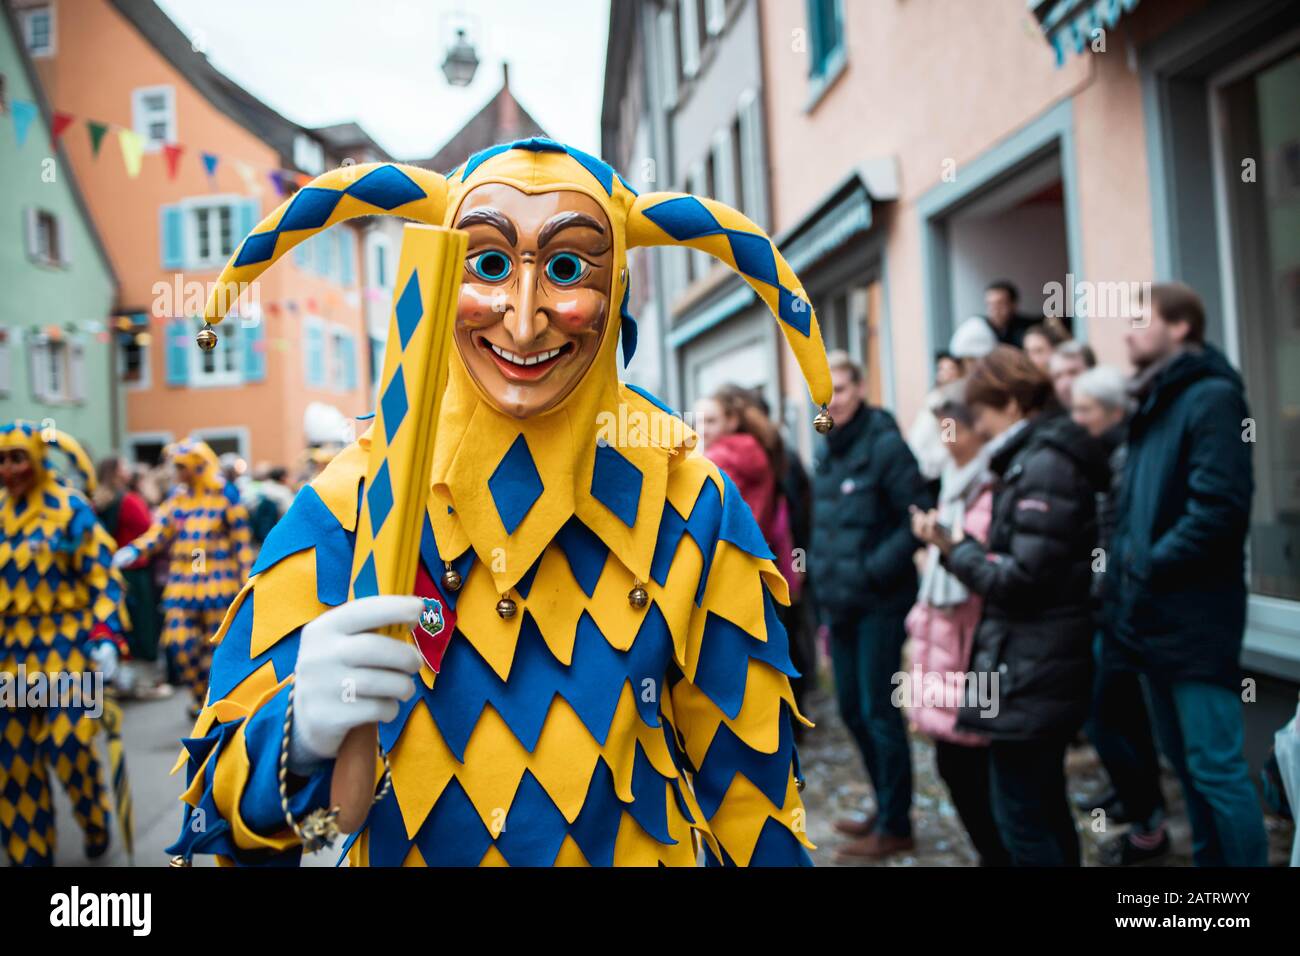 Bajass from Waldkirch - fool figure in yellow-blue robe shows a traditional object, during the carnival parade in Staufen, southern Germany Stock Photo